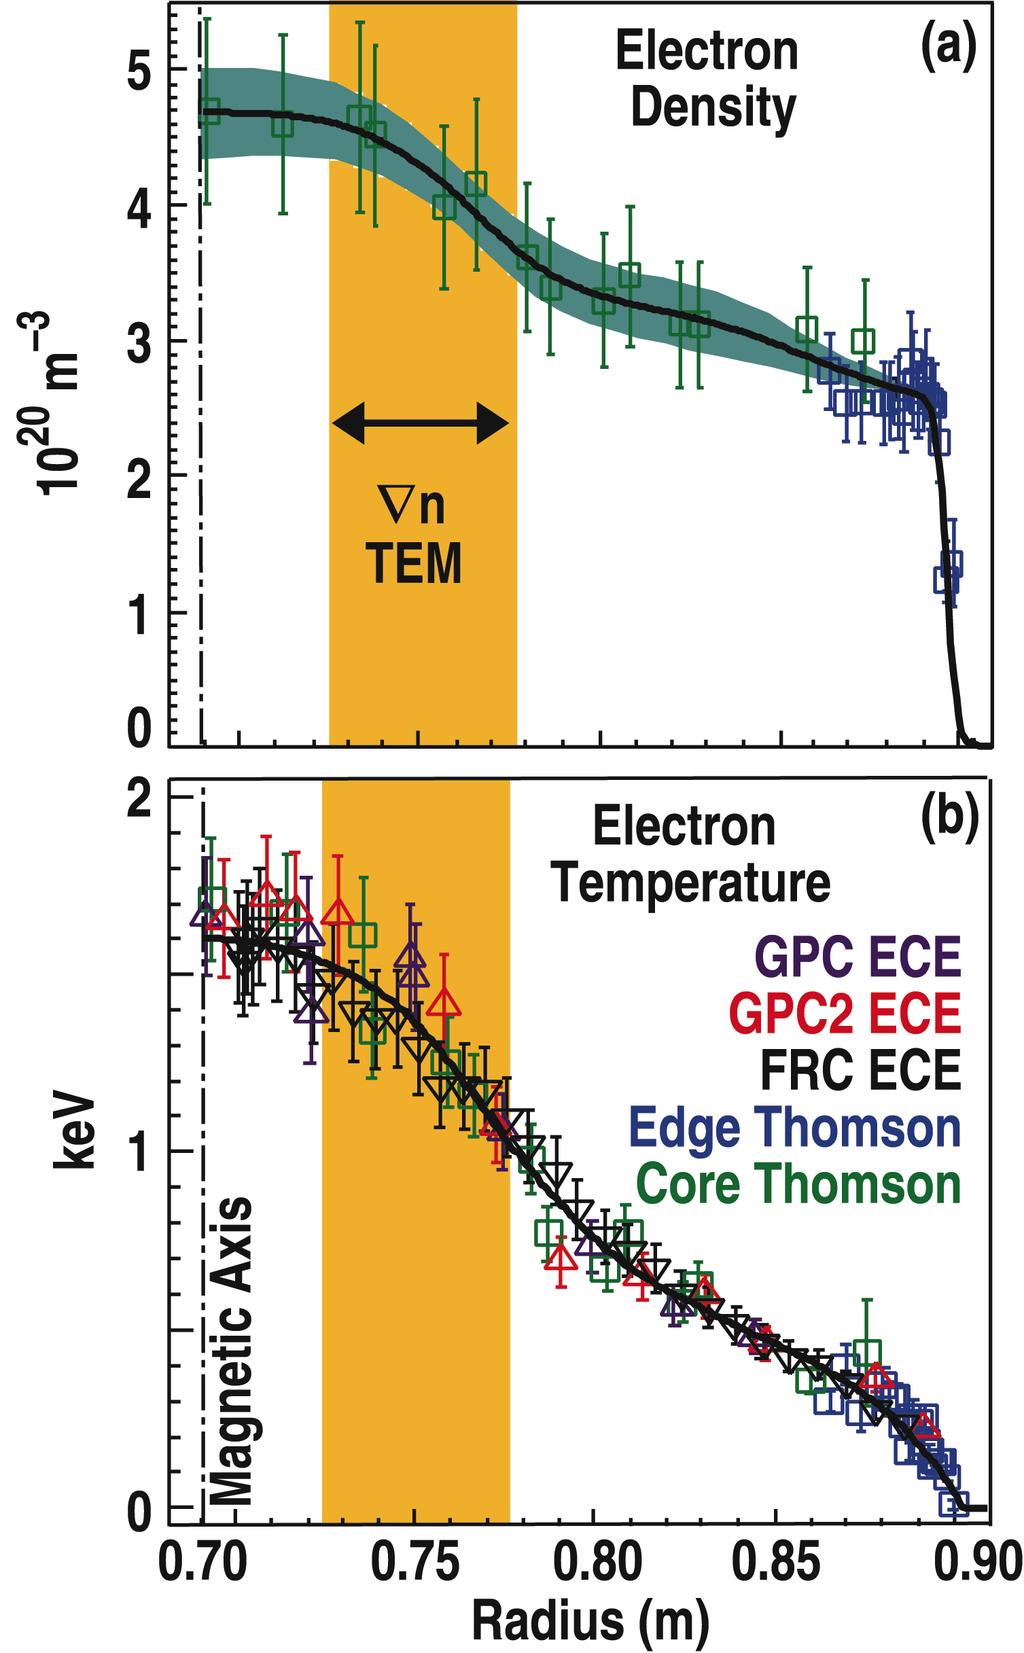 GS2 [1] and GYRO [2] simulations reveal that density gradient driven trapped electron modes (TEM) are the dominant drift modes in the inner half-radius, where the density profile responds to electron